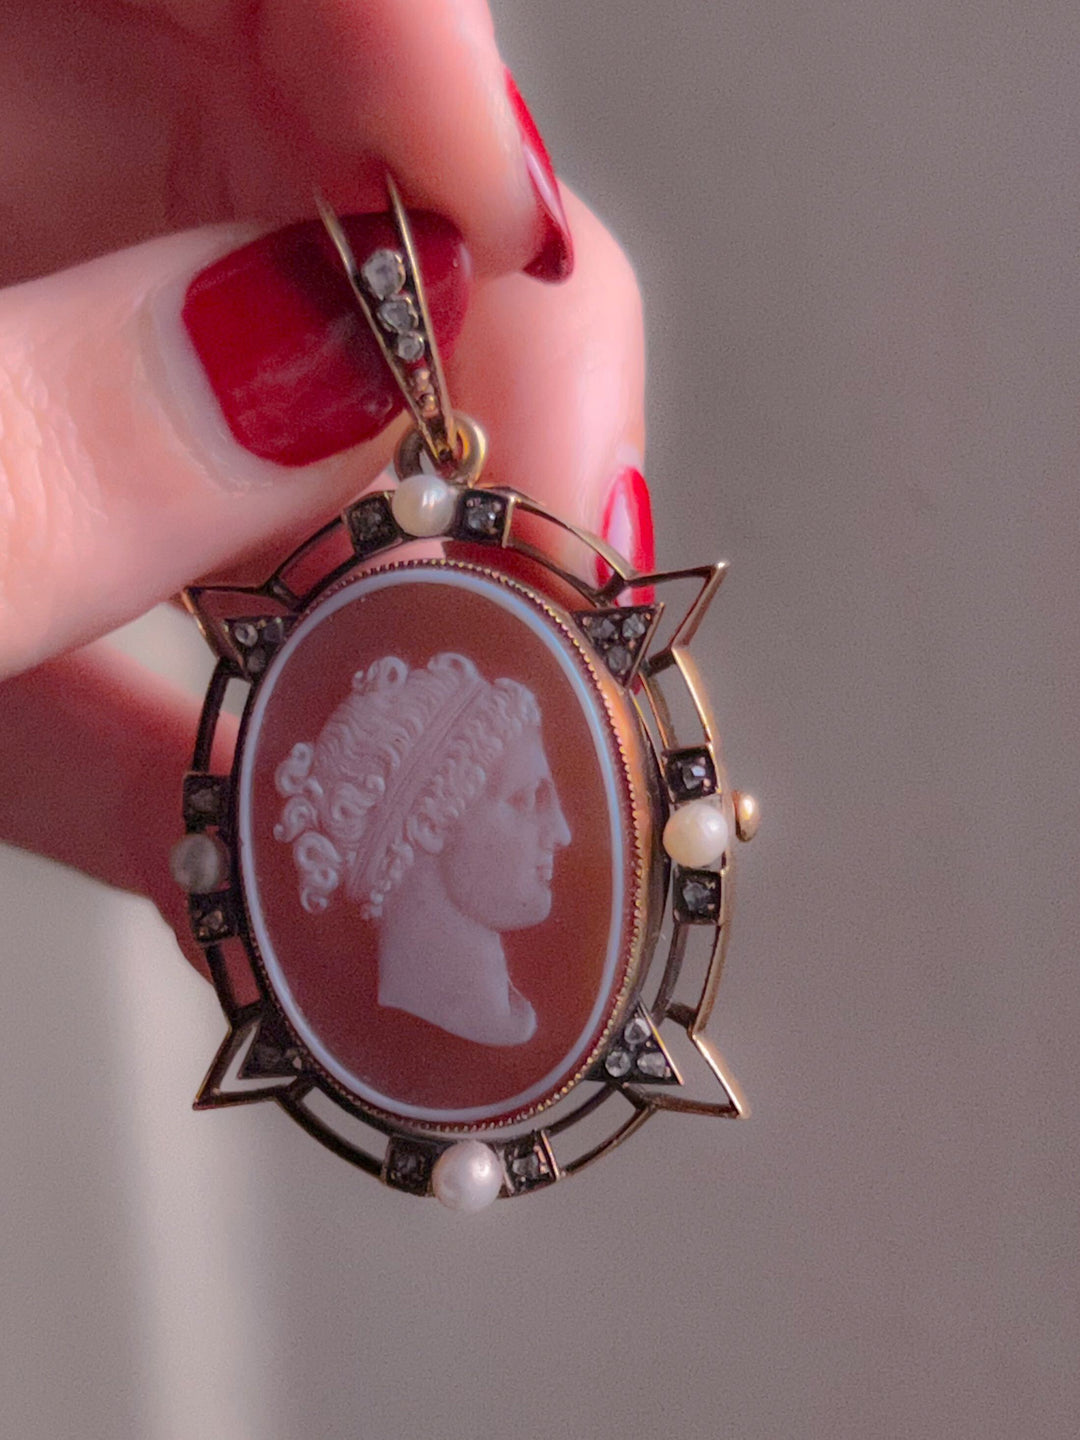 Outrageously Rare Perfect Pink Sardonyx Cameo With Pearls and Diamonds